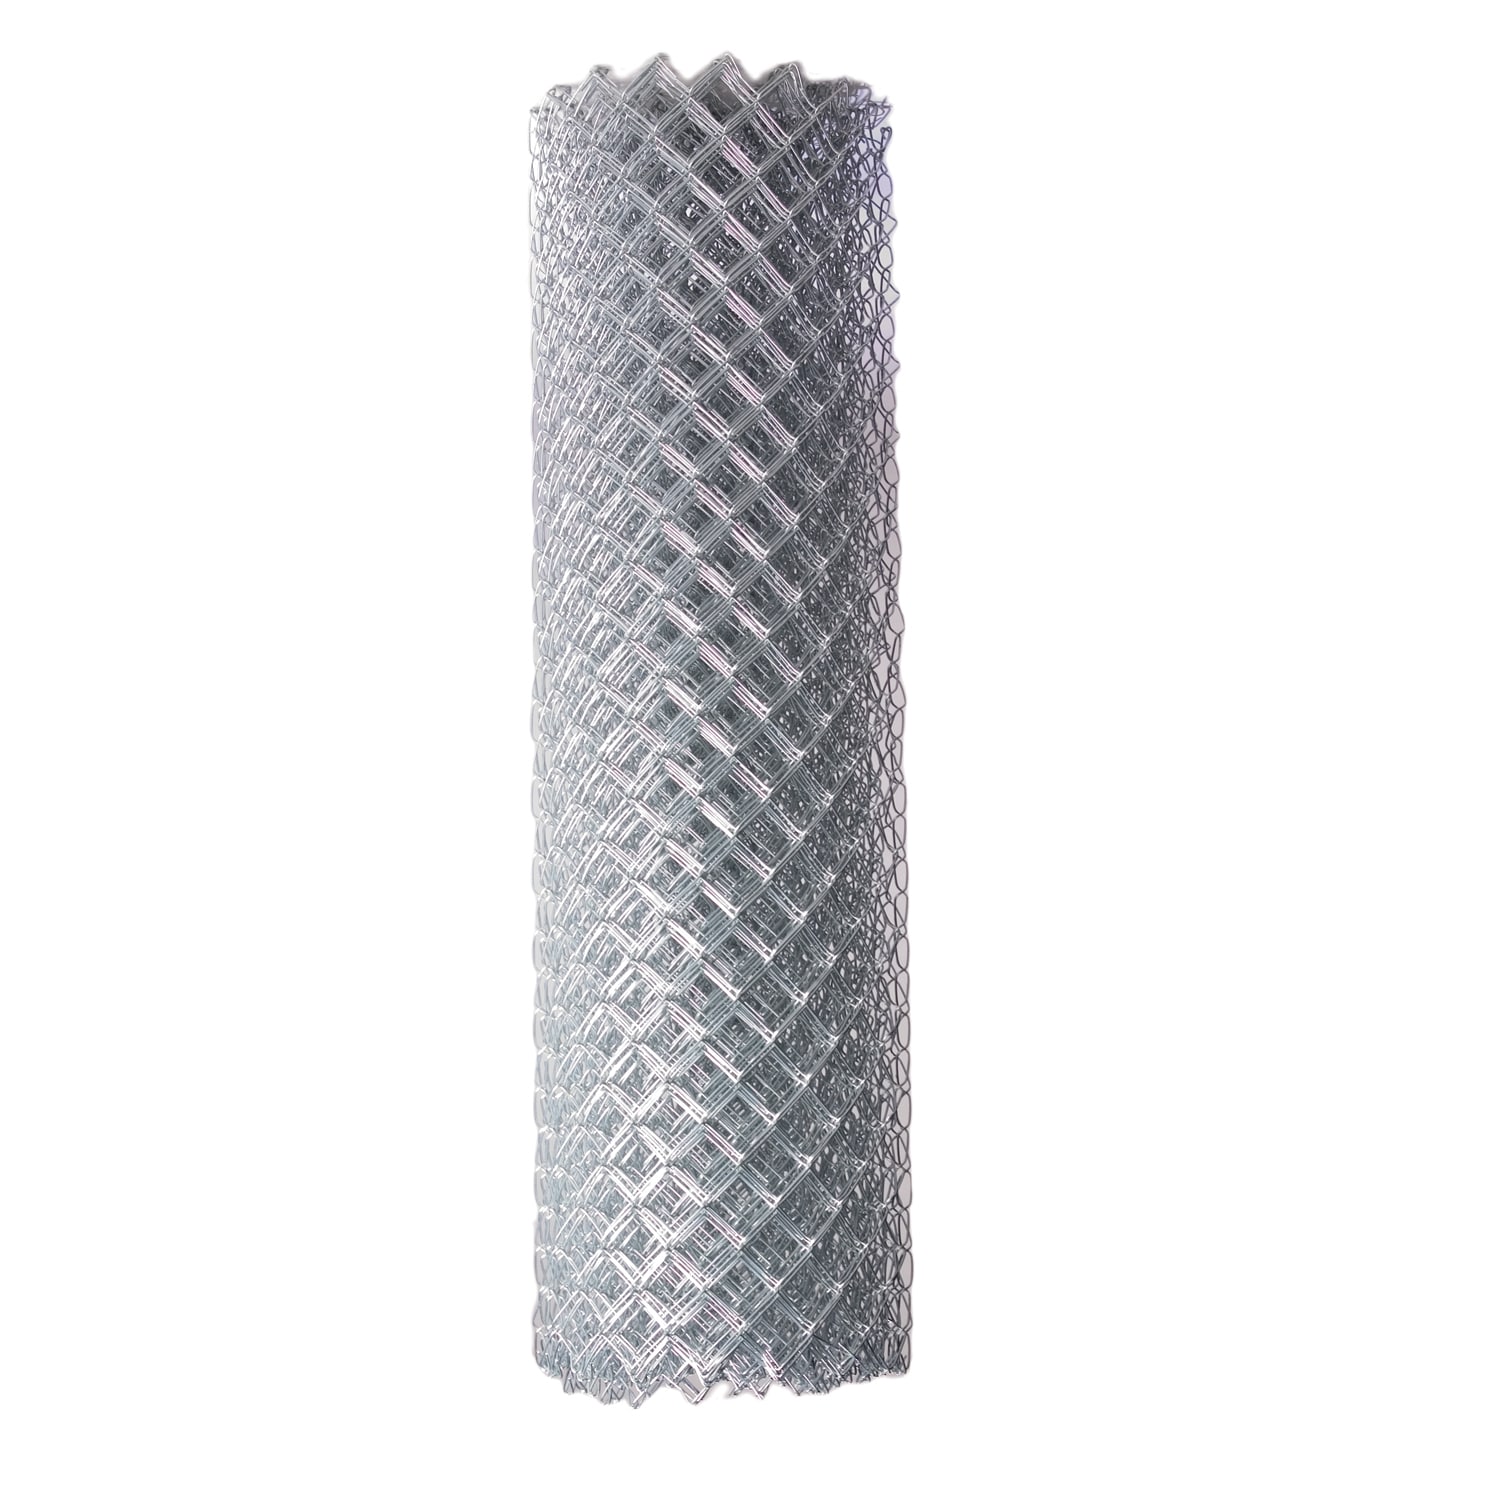 c/w Straining Wires Galvanised Chain Link Fencing 25mtr 900mm 3 FT 